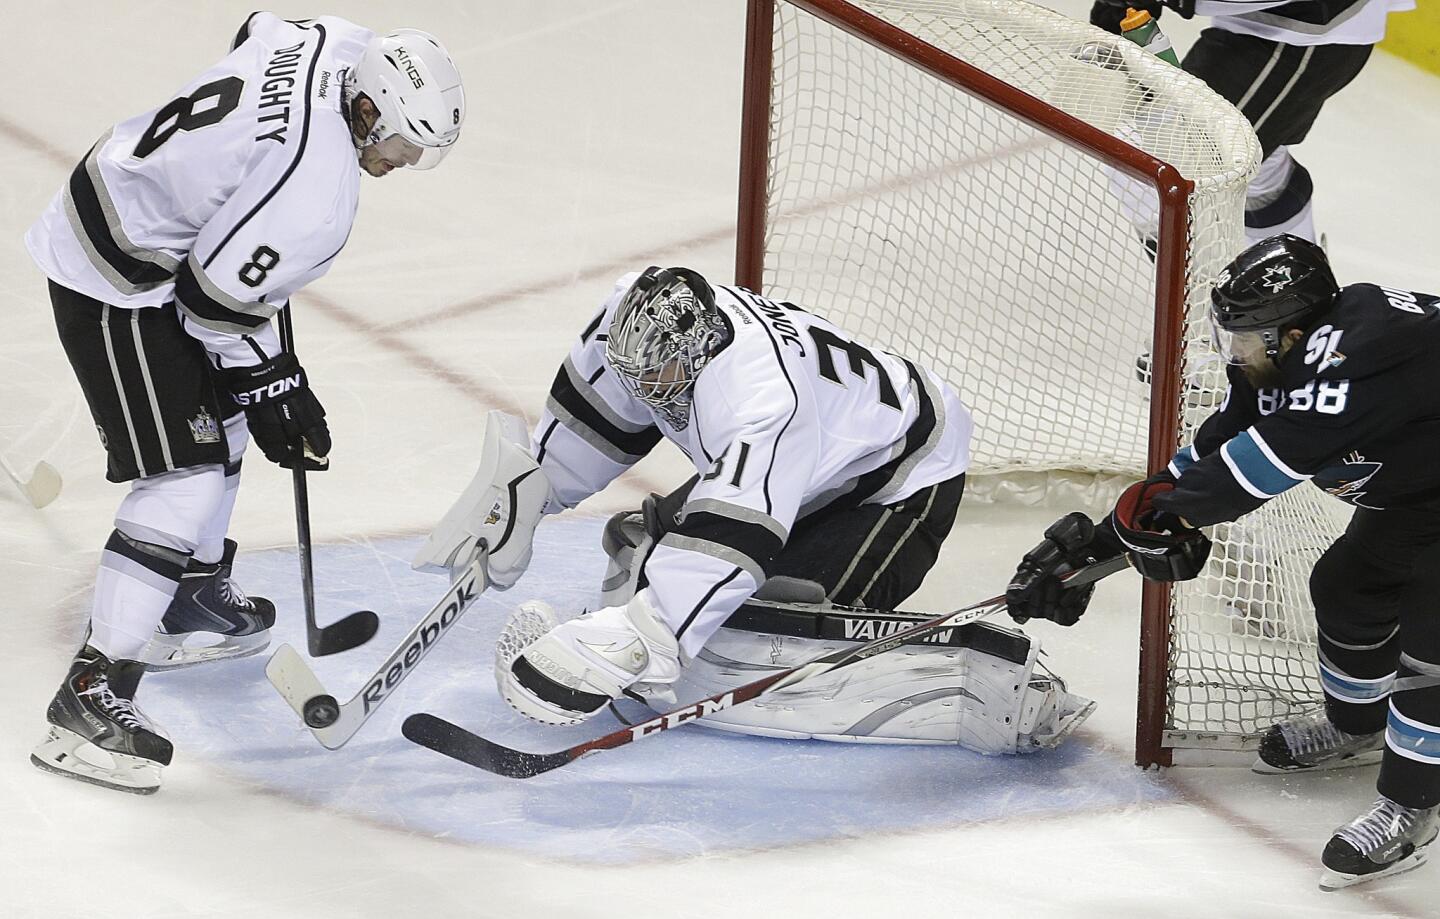 Kings goalie Martin Jones, who replaced Jonathan Quick, covers a rebound between defenseman Drew Doughty and Sharks winger Brent Burns after blocking a shot in the third period.